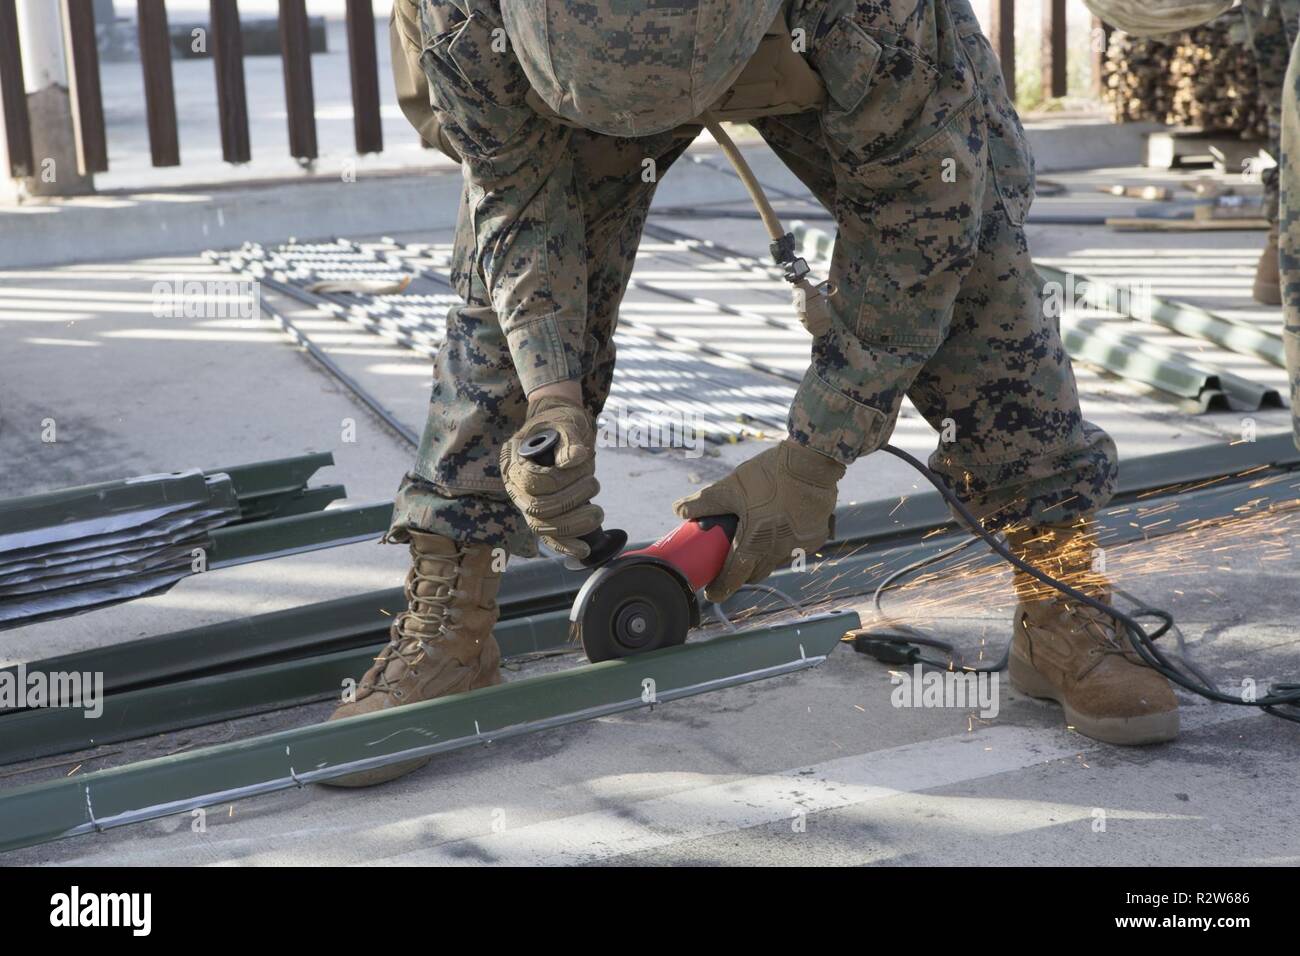 U.S. Marine Lance Cpl. Cristian Rivera, a combat engineer with 7th Engineer Support Battalion, Special Purpose Marine Air-Ground Task Force 7, grinds notches onto engineer steaks in preparation to reinforce the California-Mexico border near the Otay Mesa Port of Entry, Nov. 13, 2018. U.S. Northern Command is providing military support to the Department of Homeland Security and U.S. Customs and Border Protection to secure the Southern border of the United States. Stock Photo